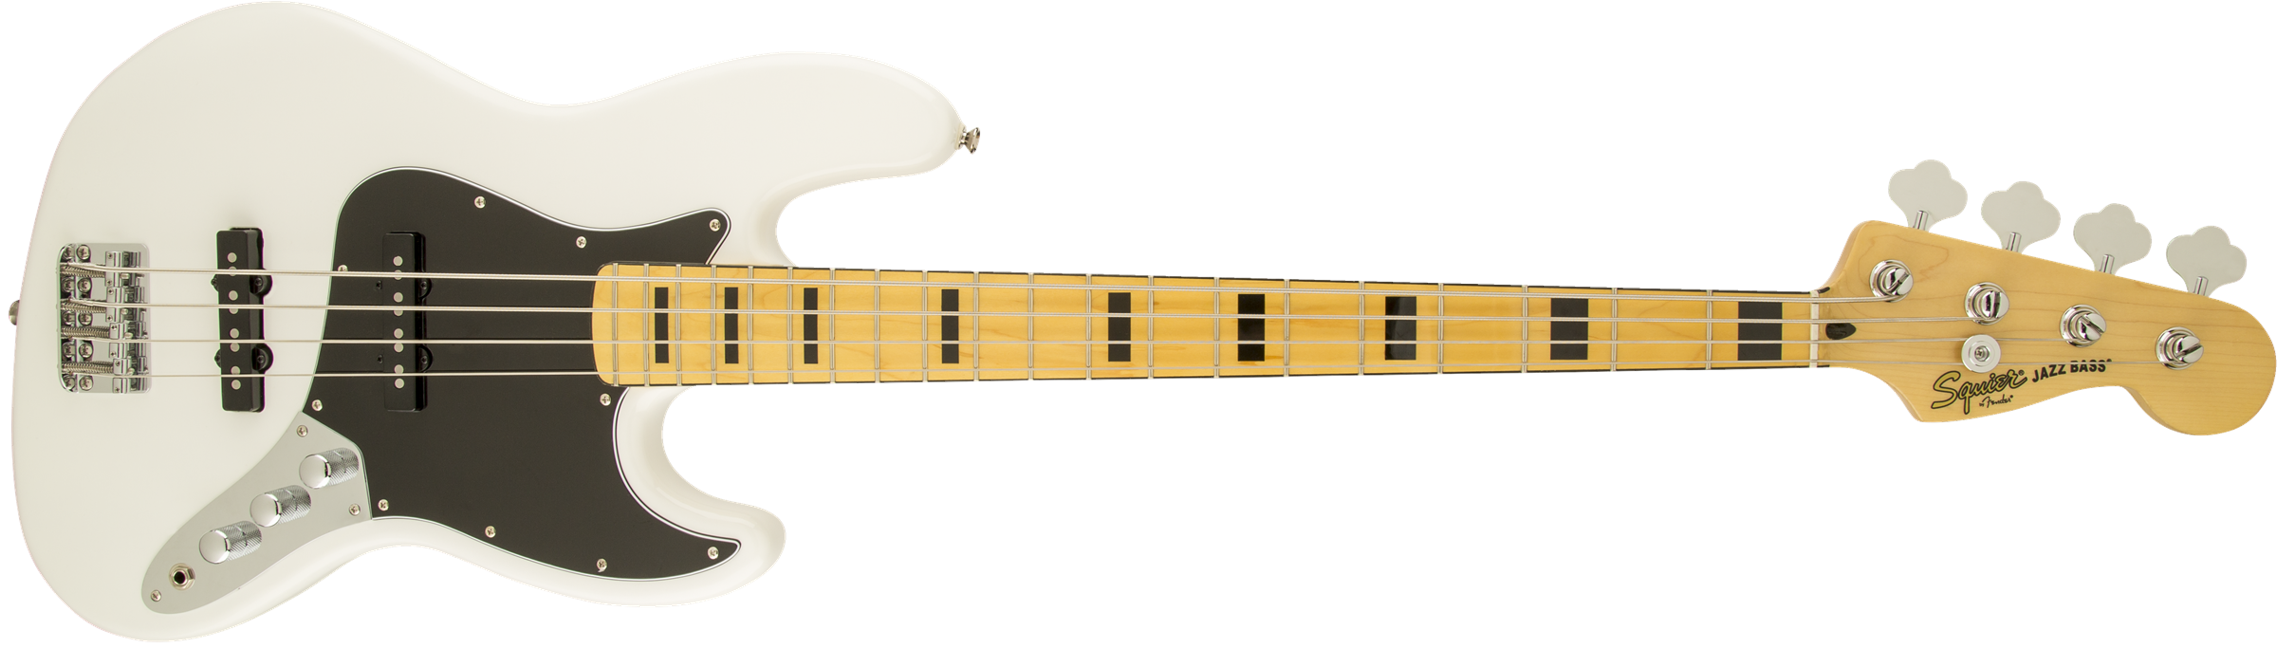 Fender Squier Vintage Modified 70's Jazz Bas (Olympic White)